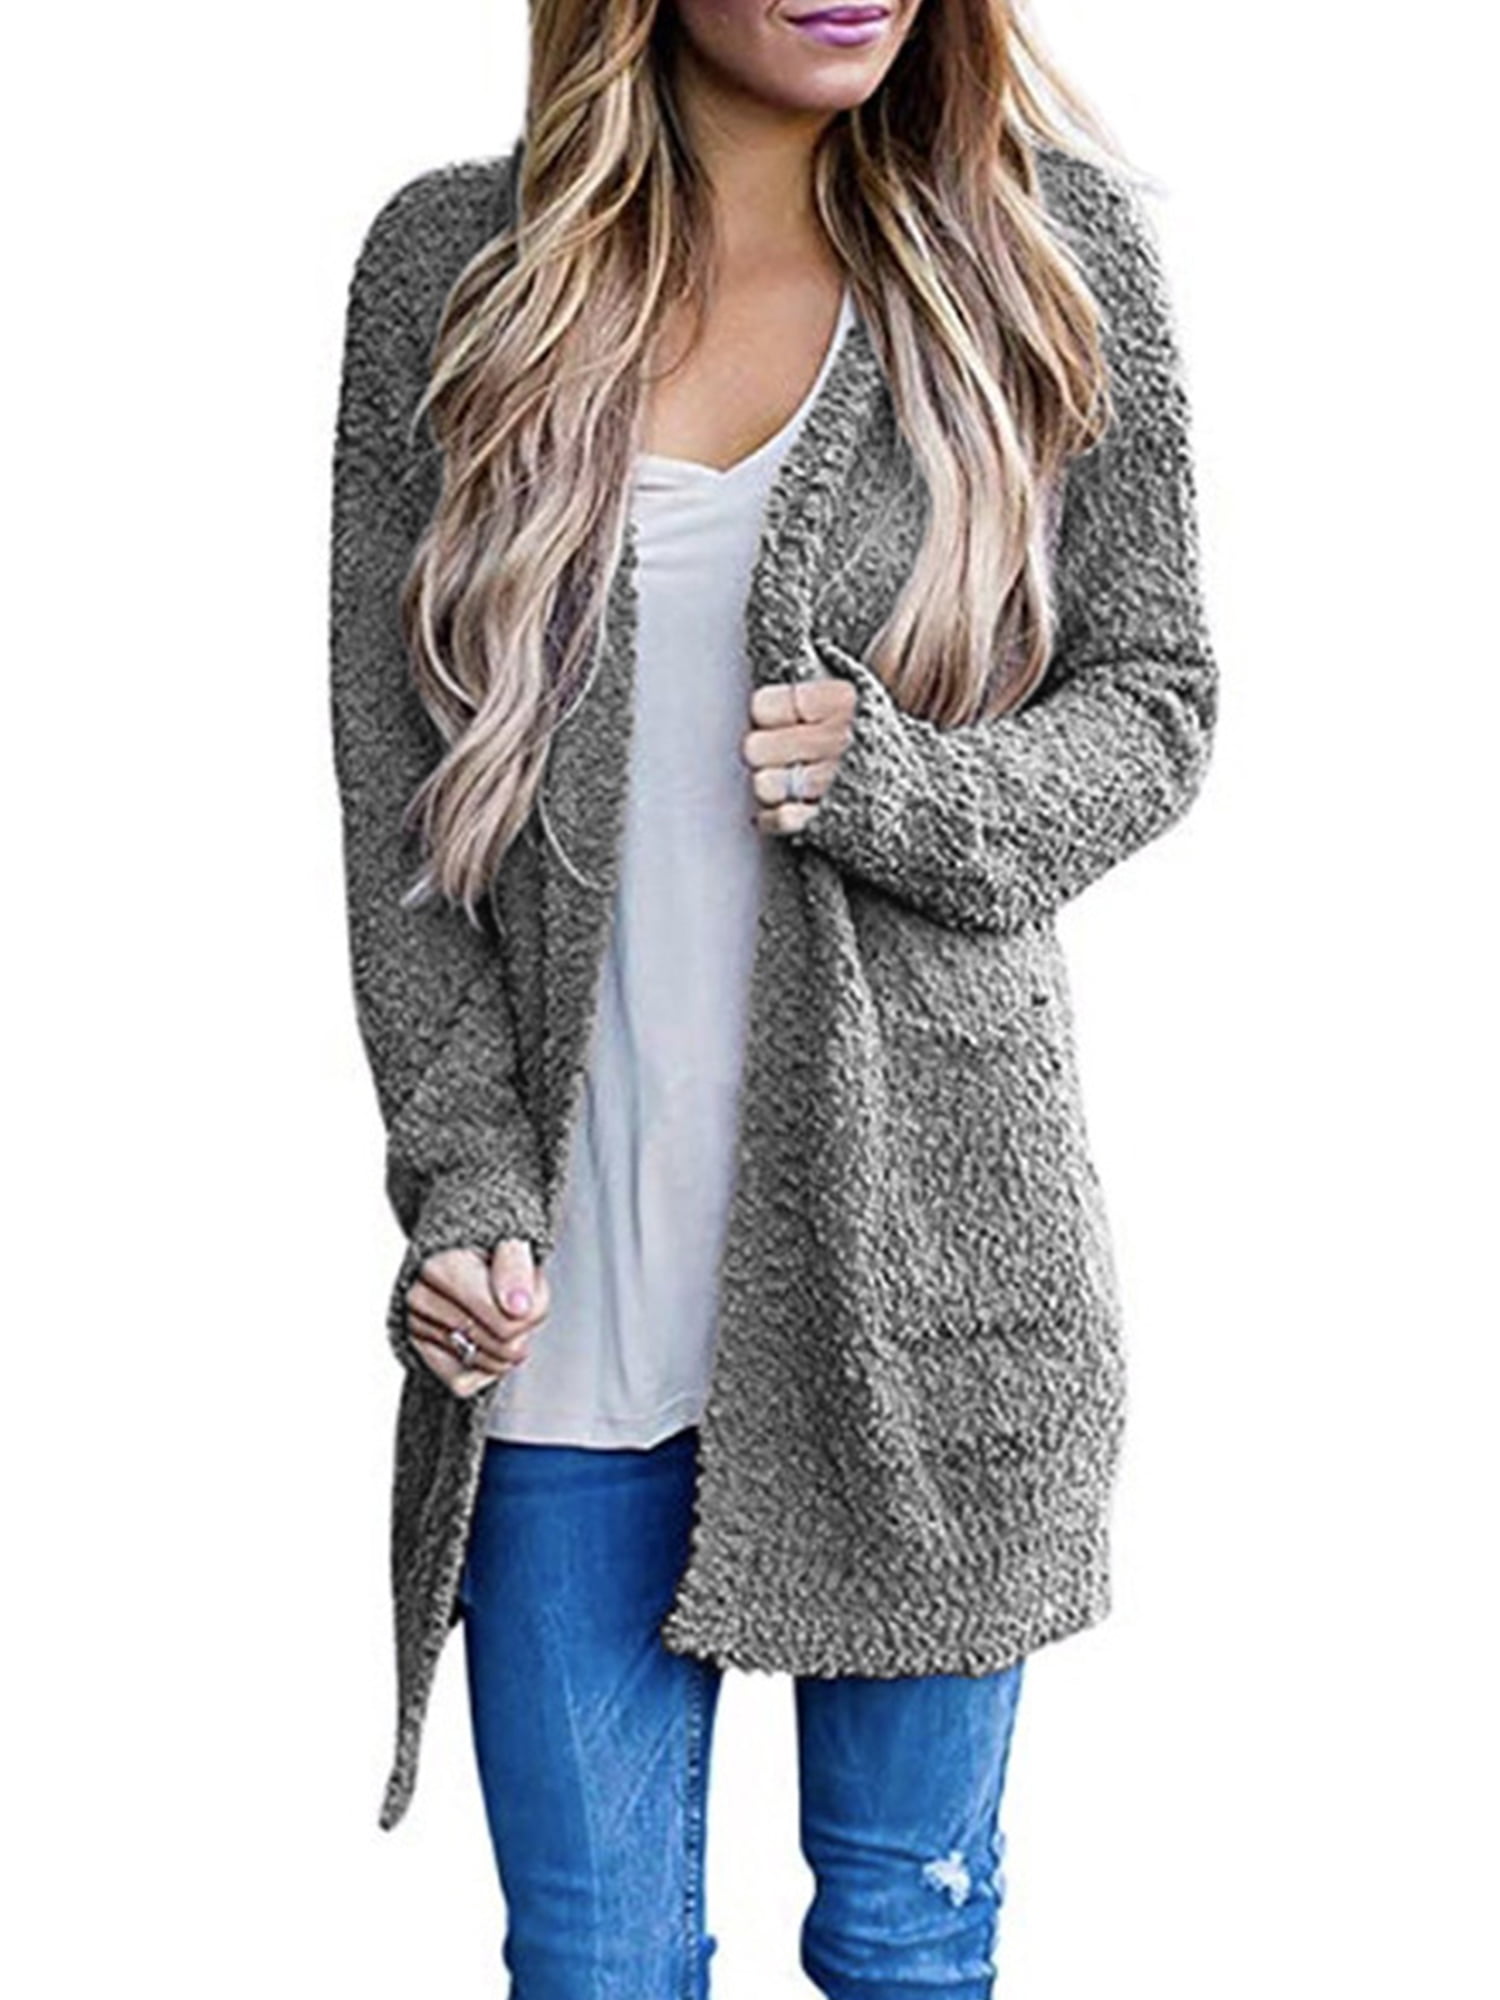 4Clovers Womens Casual Long Sleeve Lapel Open Front Long Cardigan Coat with Pockets